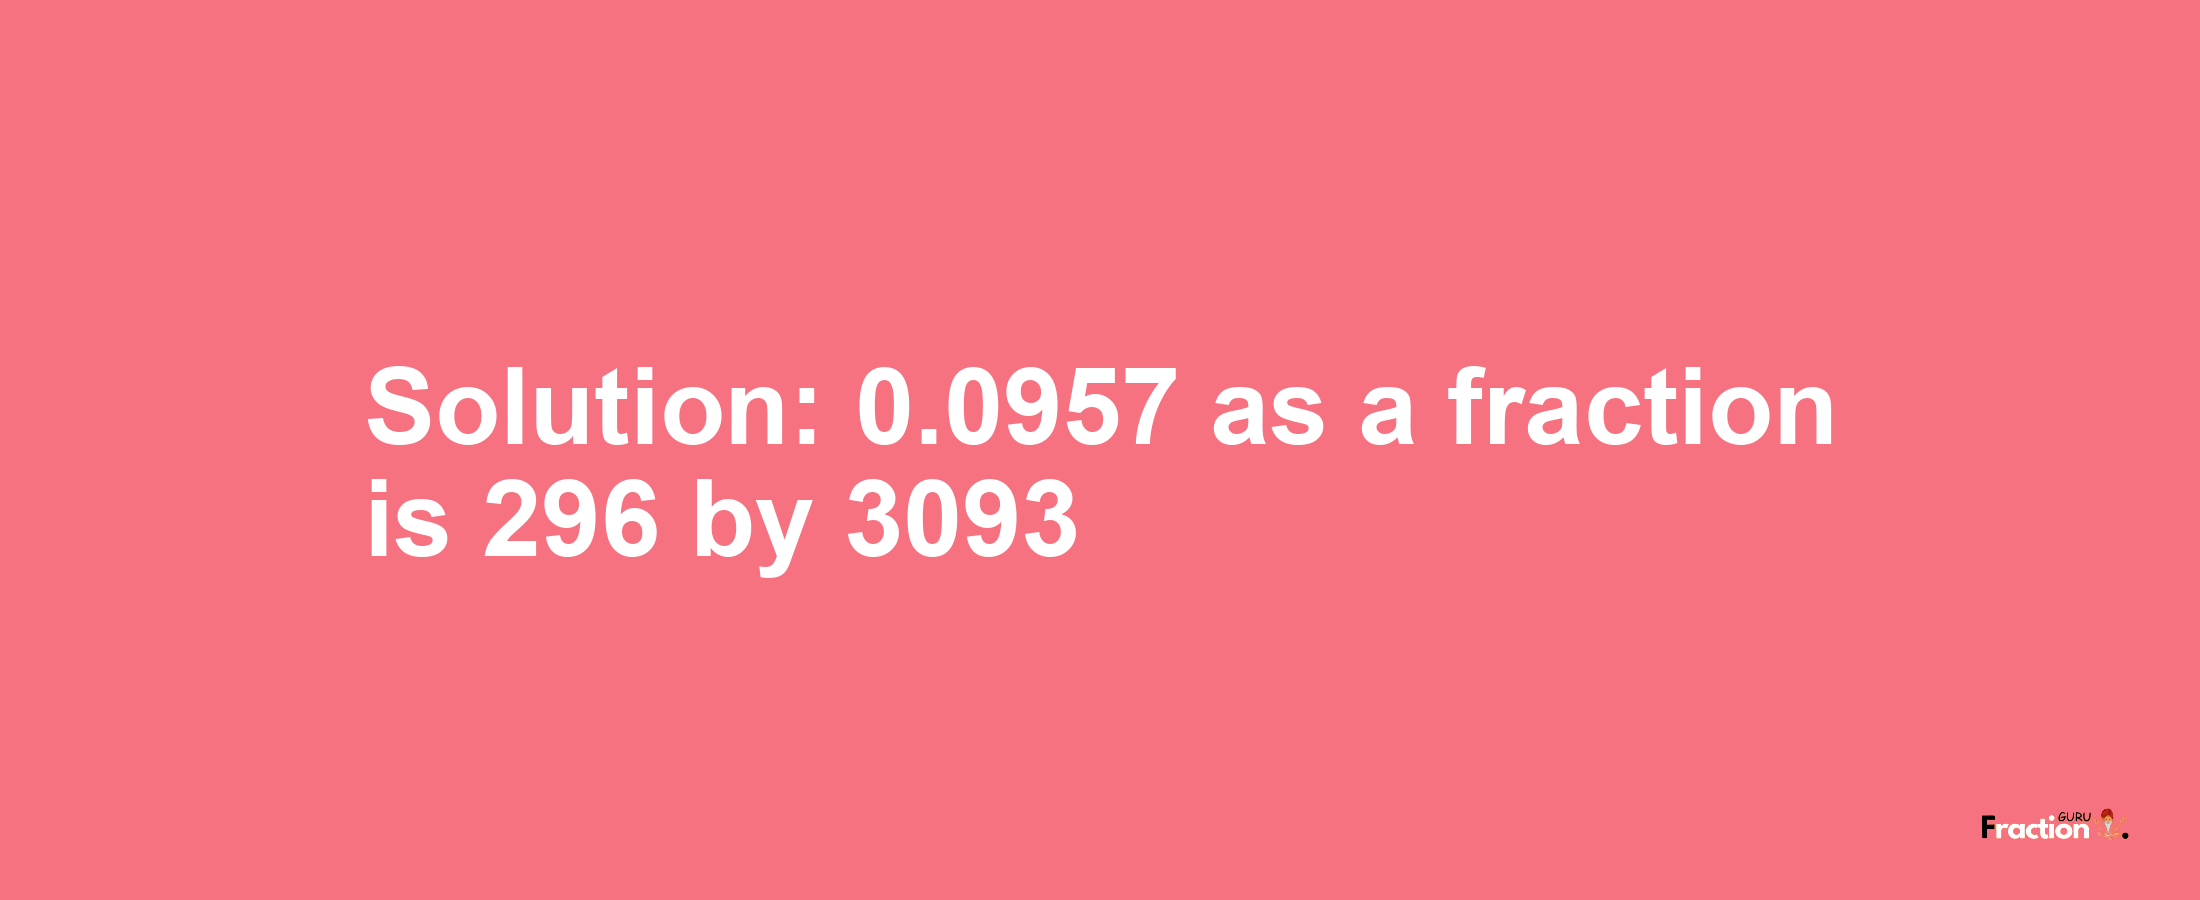 Solution:0.0957 as a fraction is 296/3093